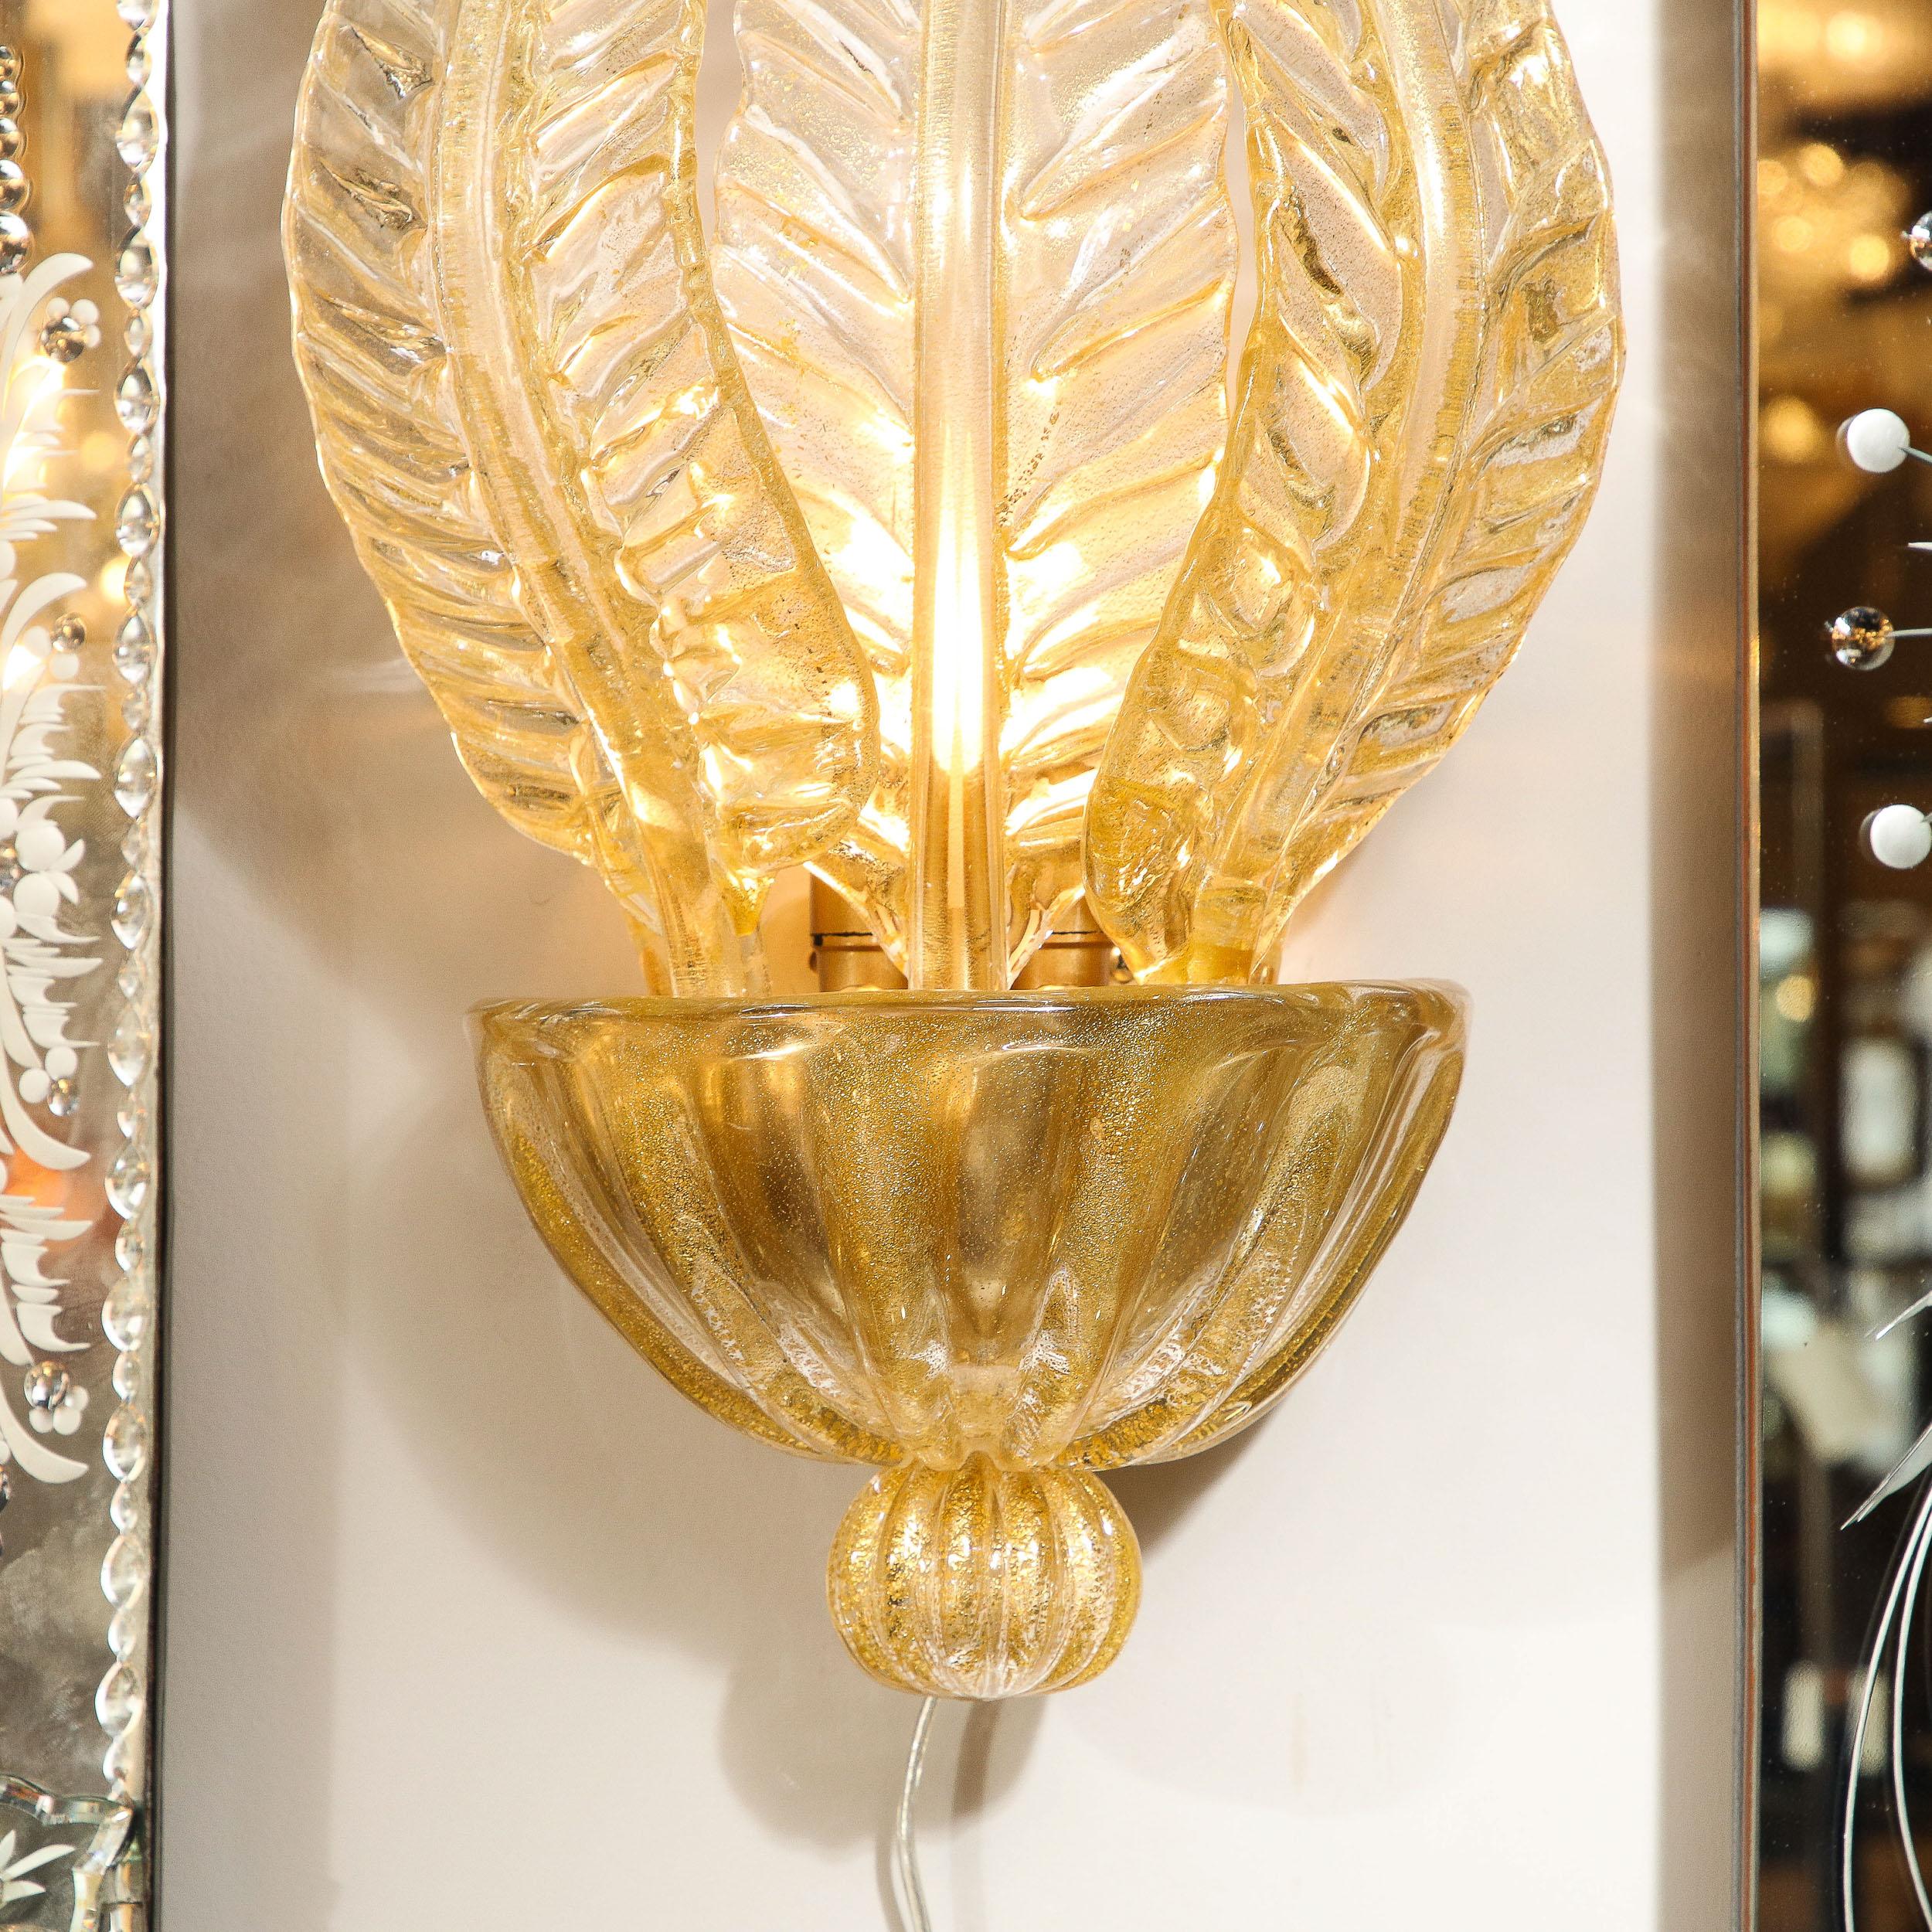 Pair of Hand-Blown Modernist Murano Foglia D'oro Glass Leaf Form Sconces In Excellent Condition For Sale In New York, NY